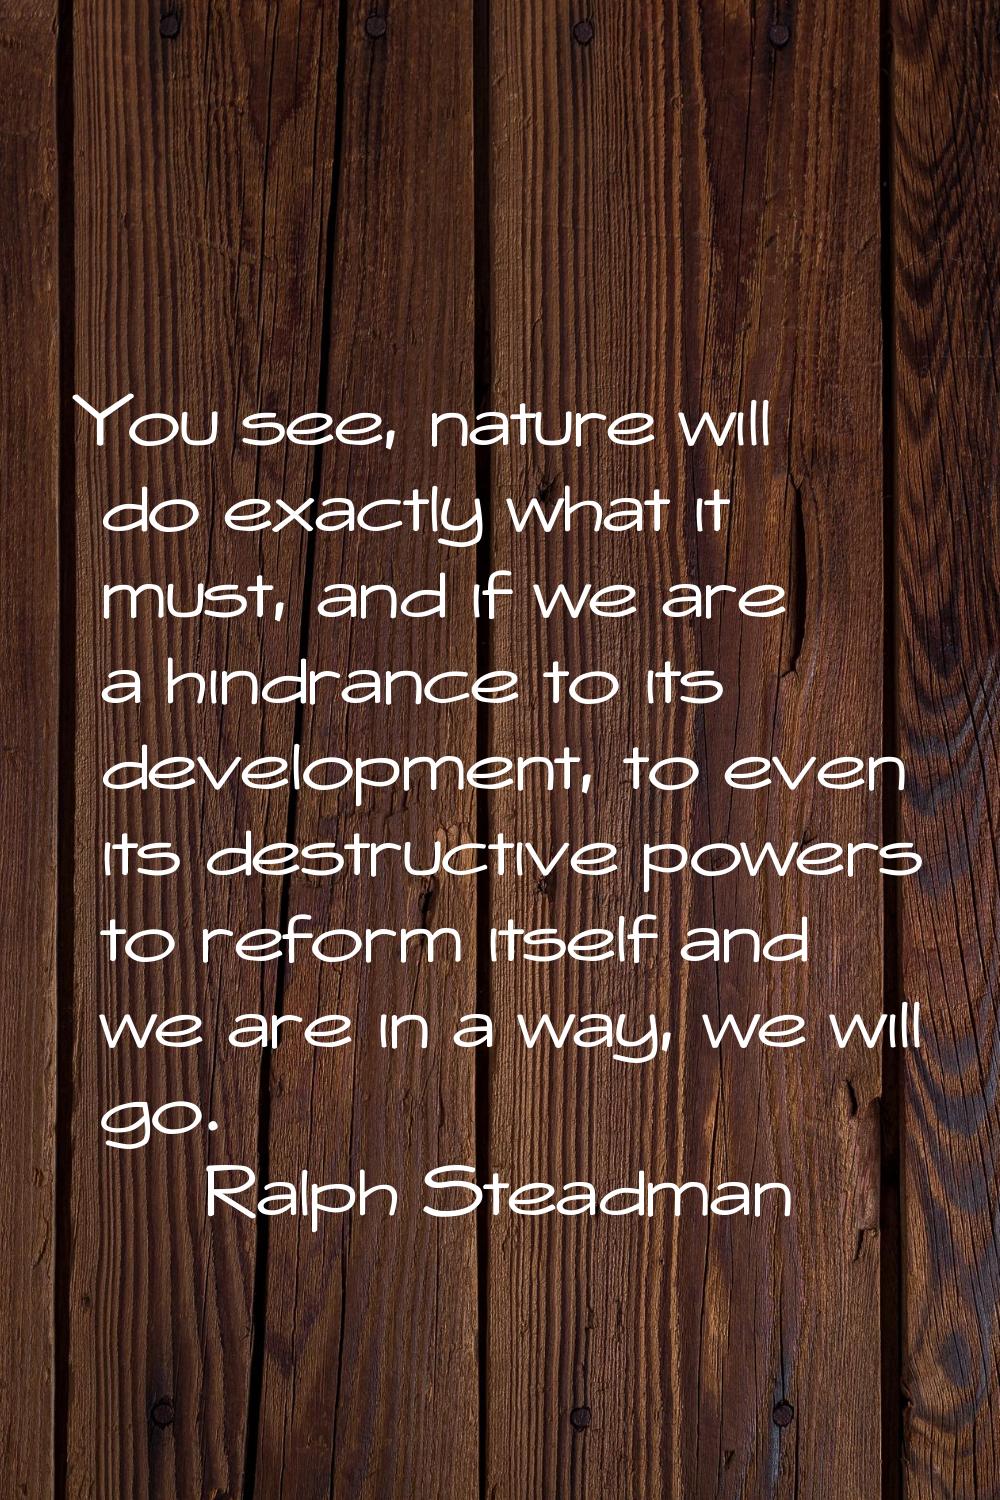 You see, nature will do exactly what it must, and if we are a hindrance to its development, to even